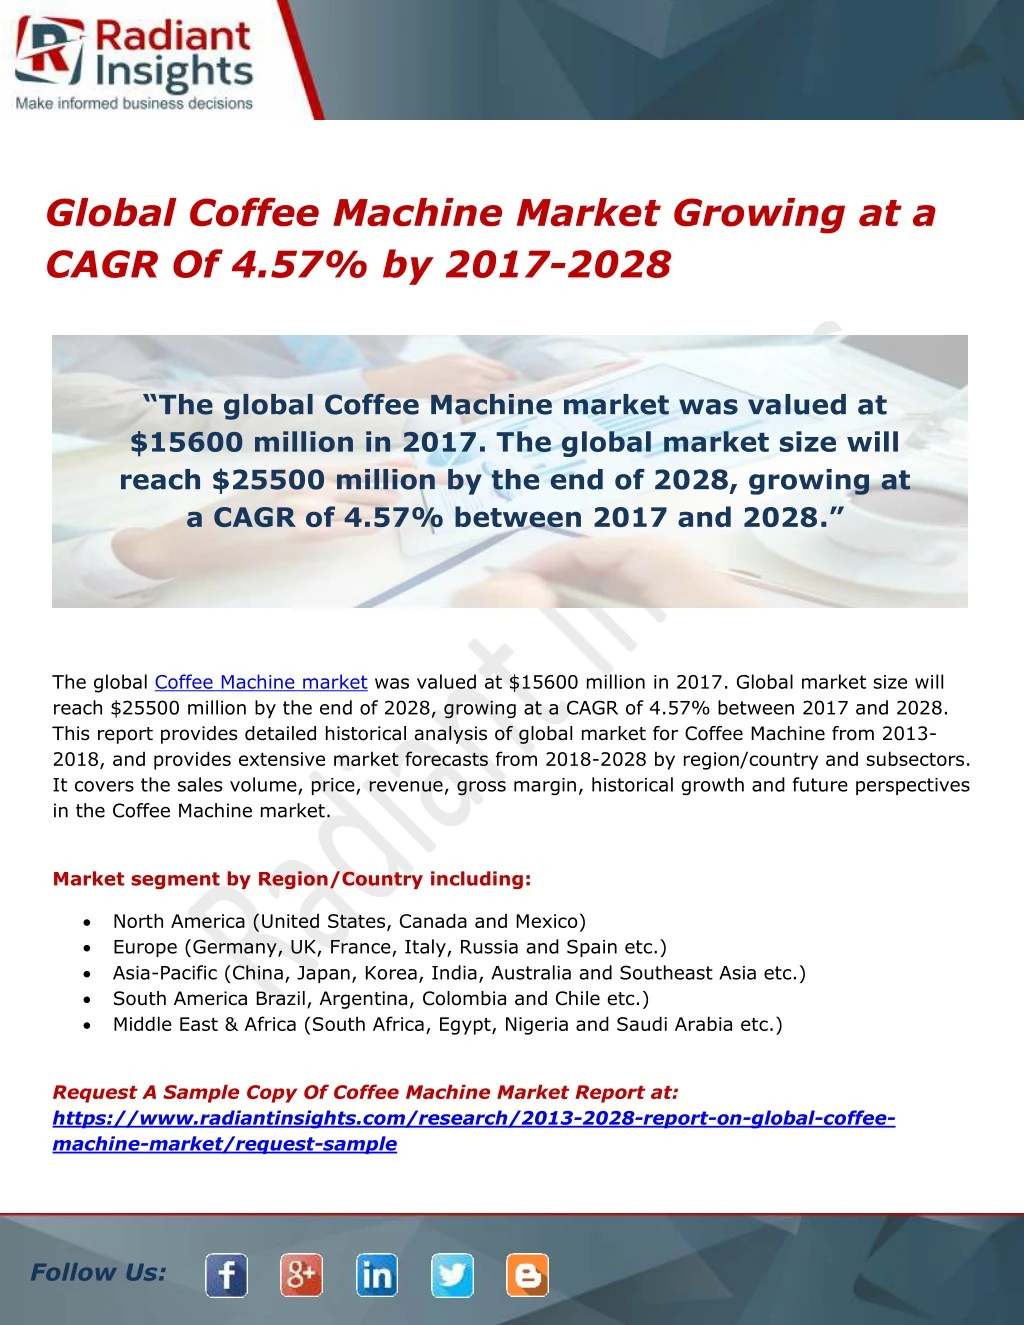 global coffee machine market growing at a cagr